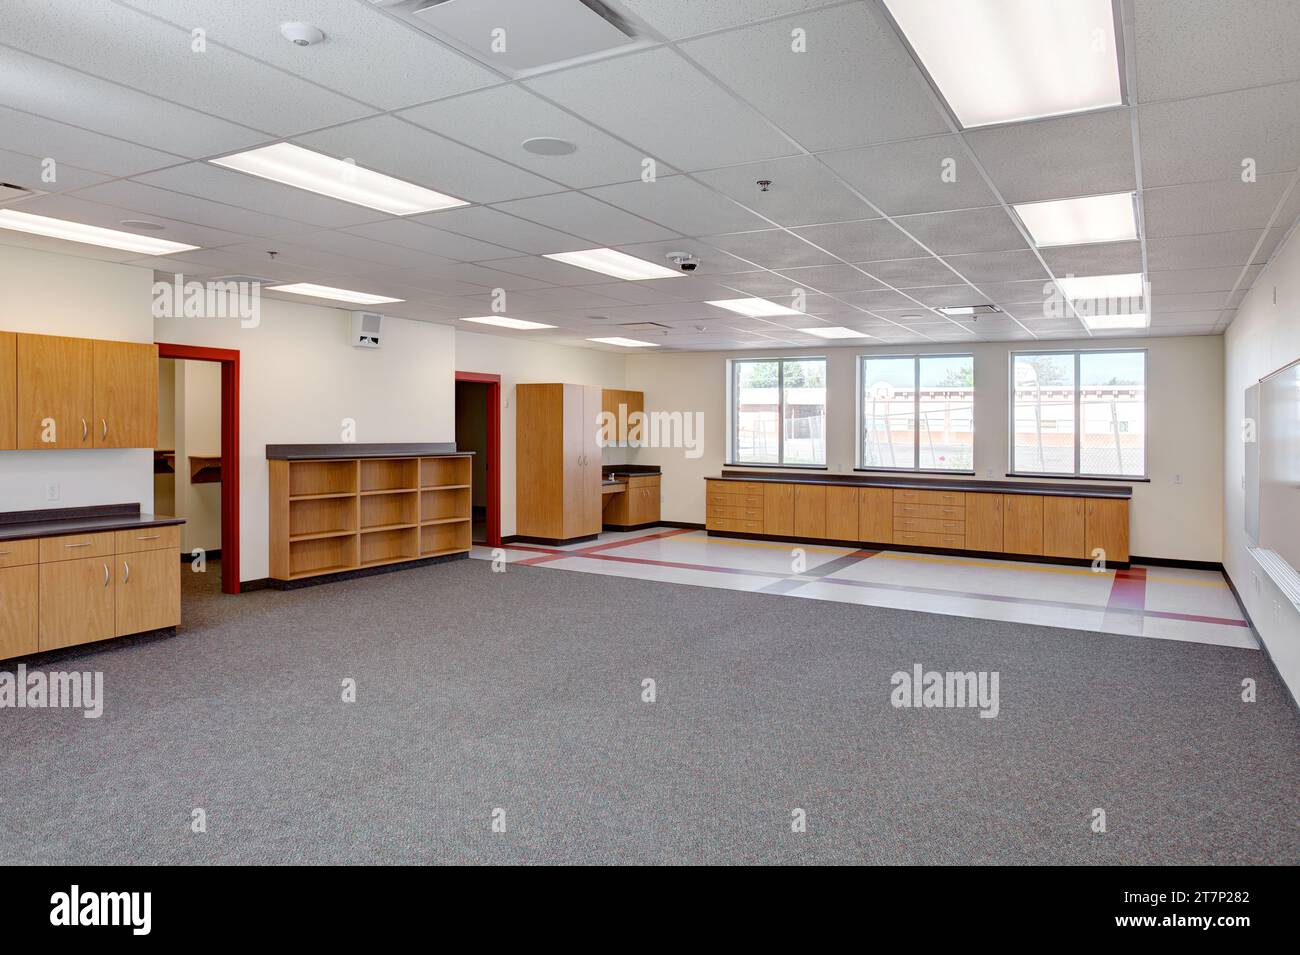 Modern cabinets in a new elementary school.  The cabinets are designed for function and economy. Stock Photo